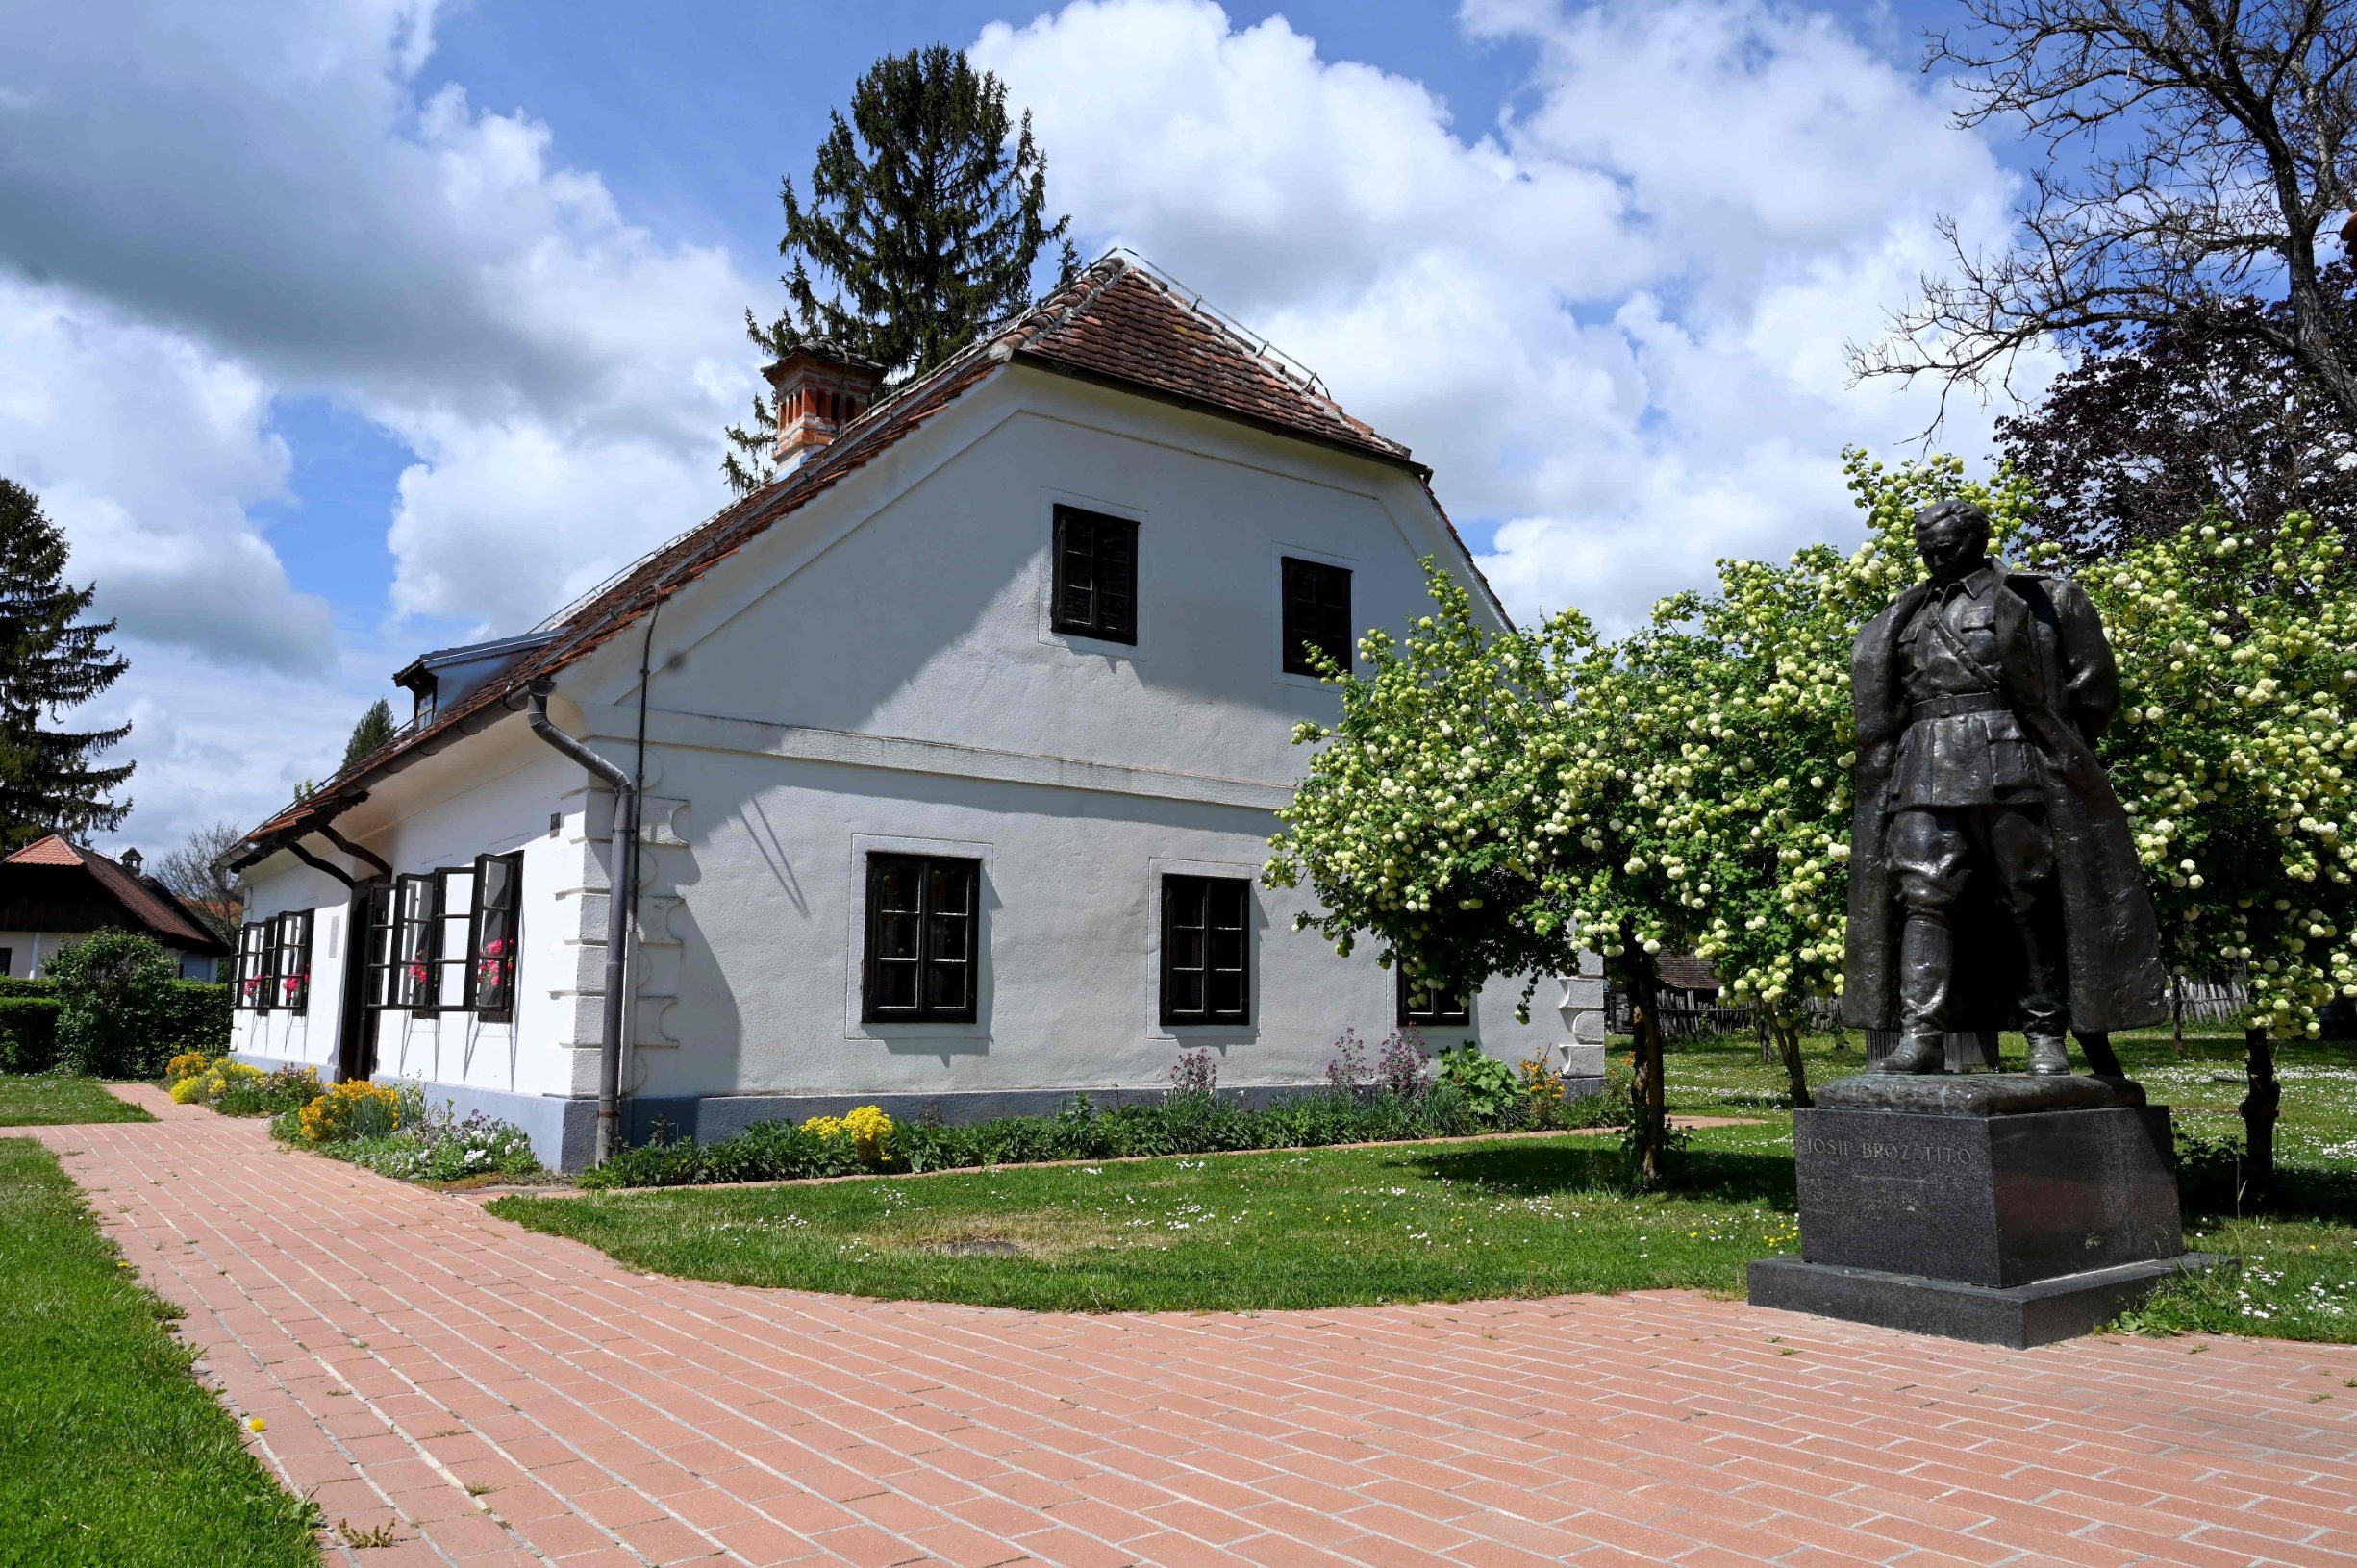 A picture taken on April 30, 2020 shows the statue by Croatian sculptor Antun Augustincic (19001979), of Josip Broz Tito (18921980), former President of communist Yugoslavia, next to the museum in Josip Broz Tito's birth house in the village of Kumrovec, some 50 km from Zagreb. - A benevolent unifier or a power-hungry dictator? On the 40th anniversary of his death, the late Yugoslav leader Josip Broz Tito's legacy is still a topic of debate. (Photo by Denis LOVROVIC / AFP)